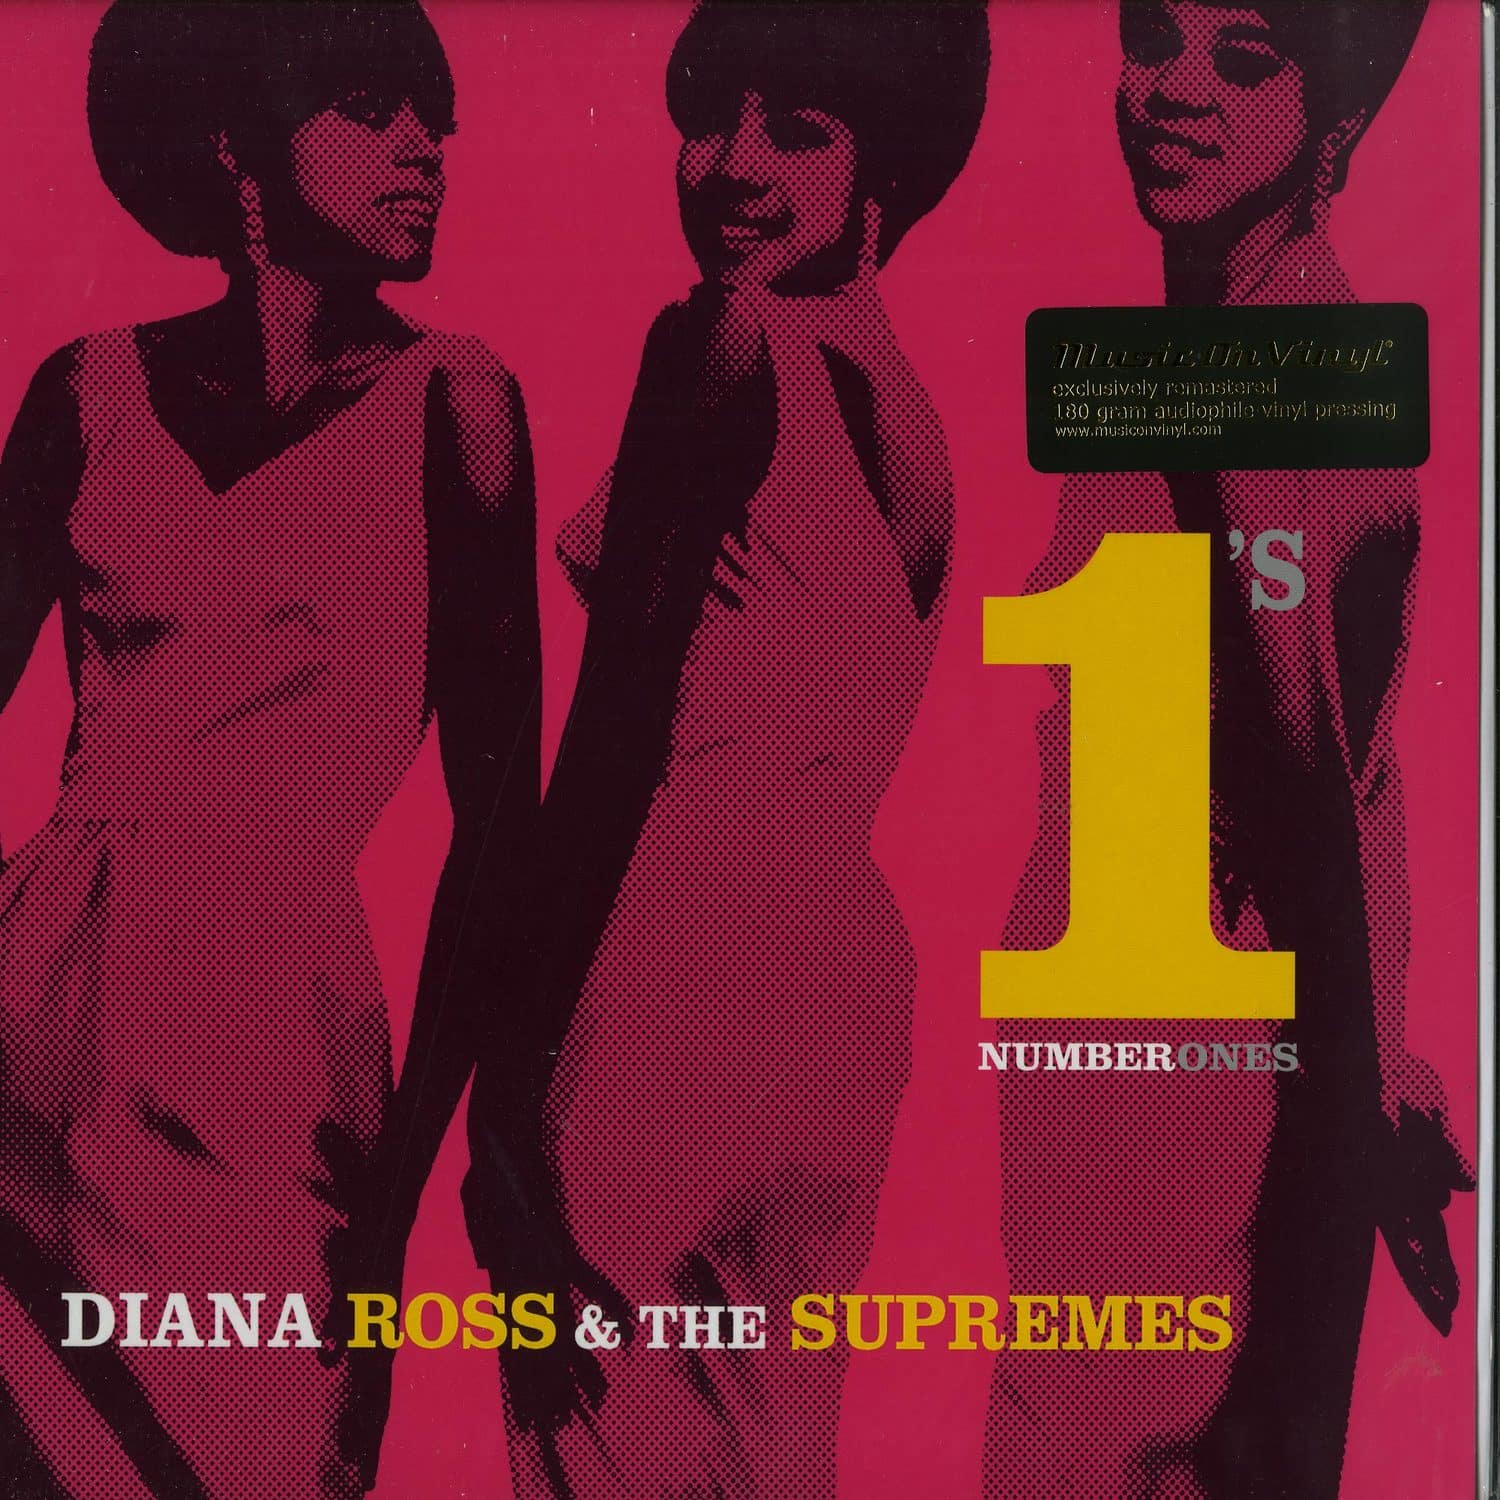 Diana Ross & The Supremes - NO. 1 S 